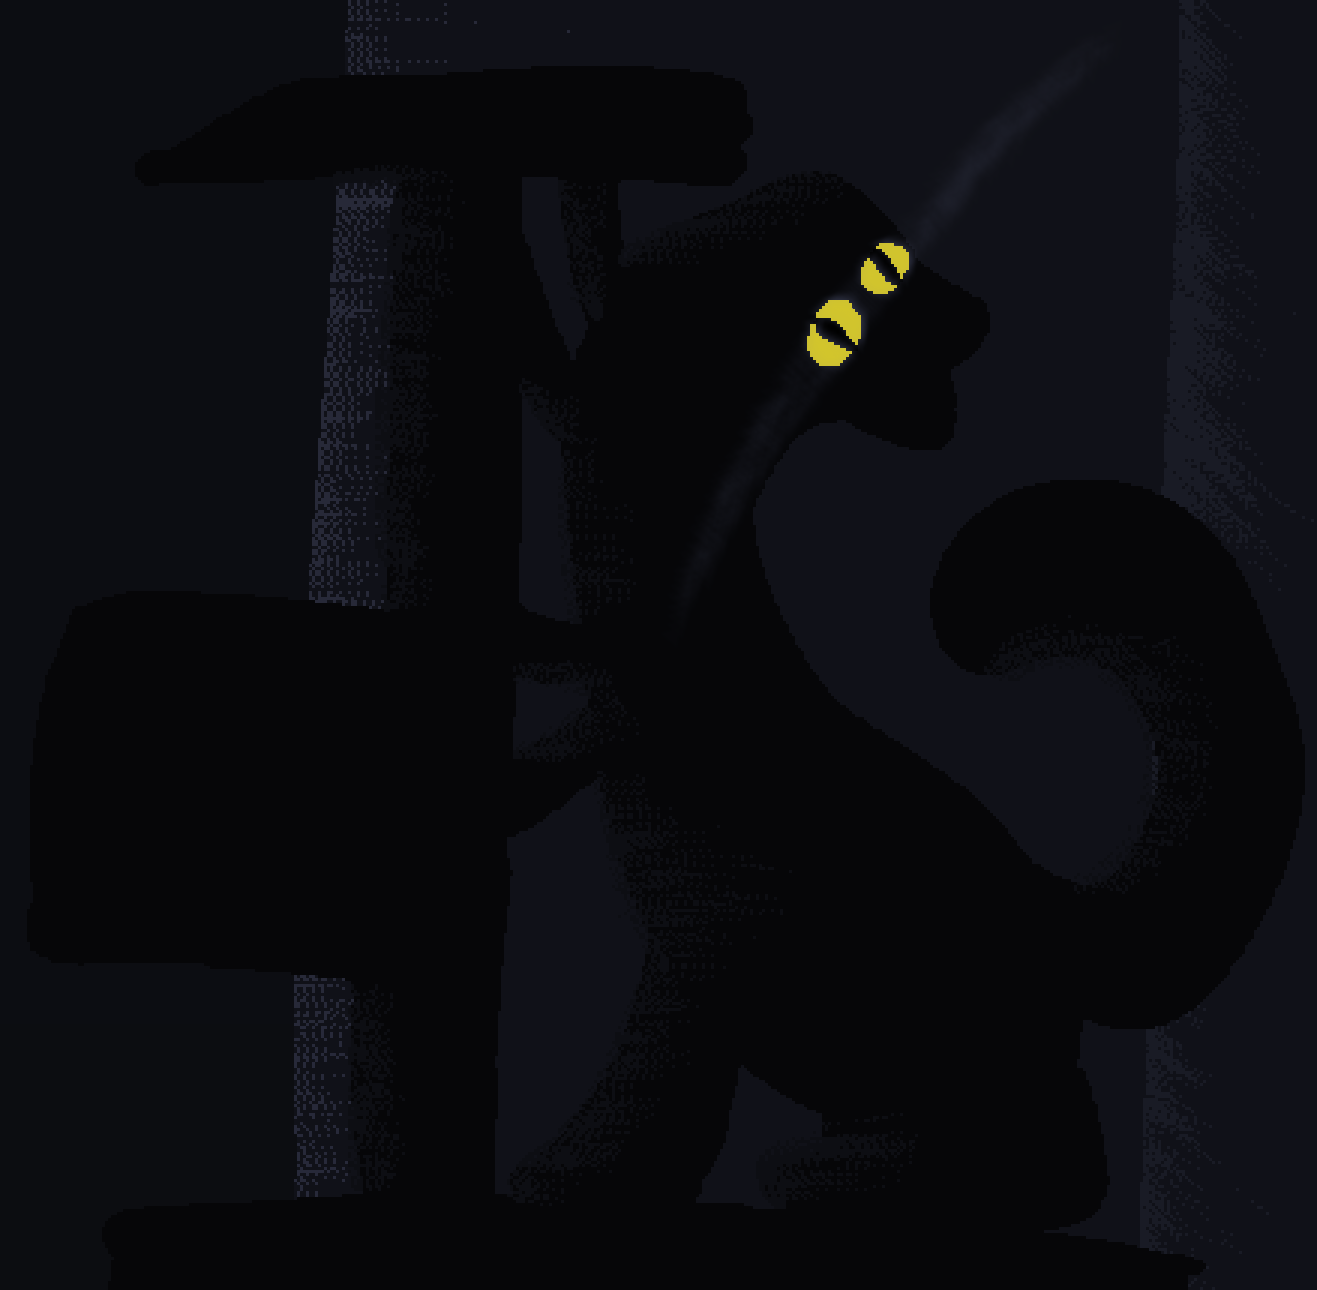 a cat stretching on a scratching post at midnight. light trickles in from behind a curtain, the cat appears to have four sets of legs, bright yellow eyes staring directly at the viewer of the art.